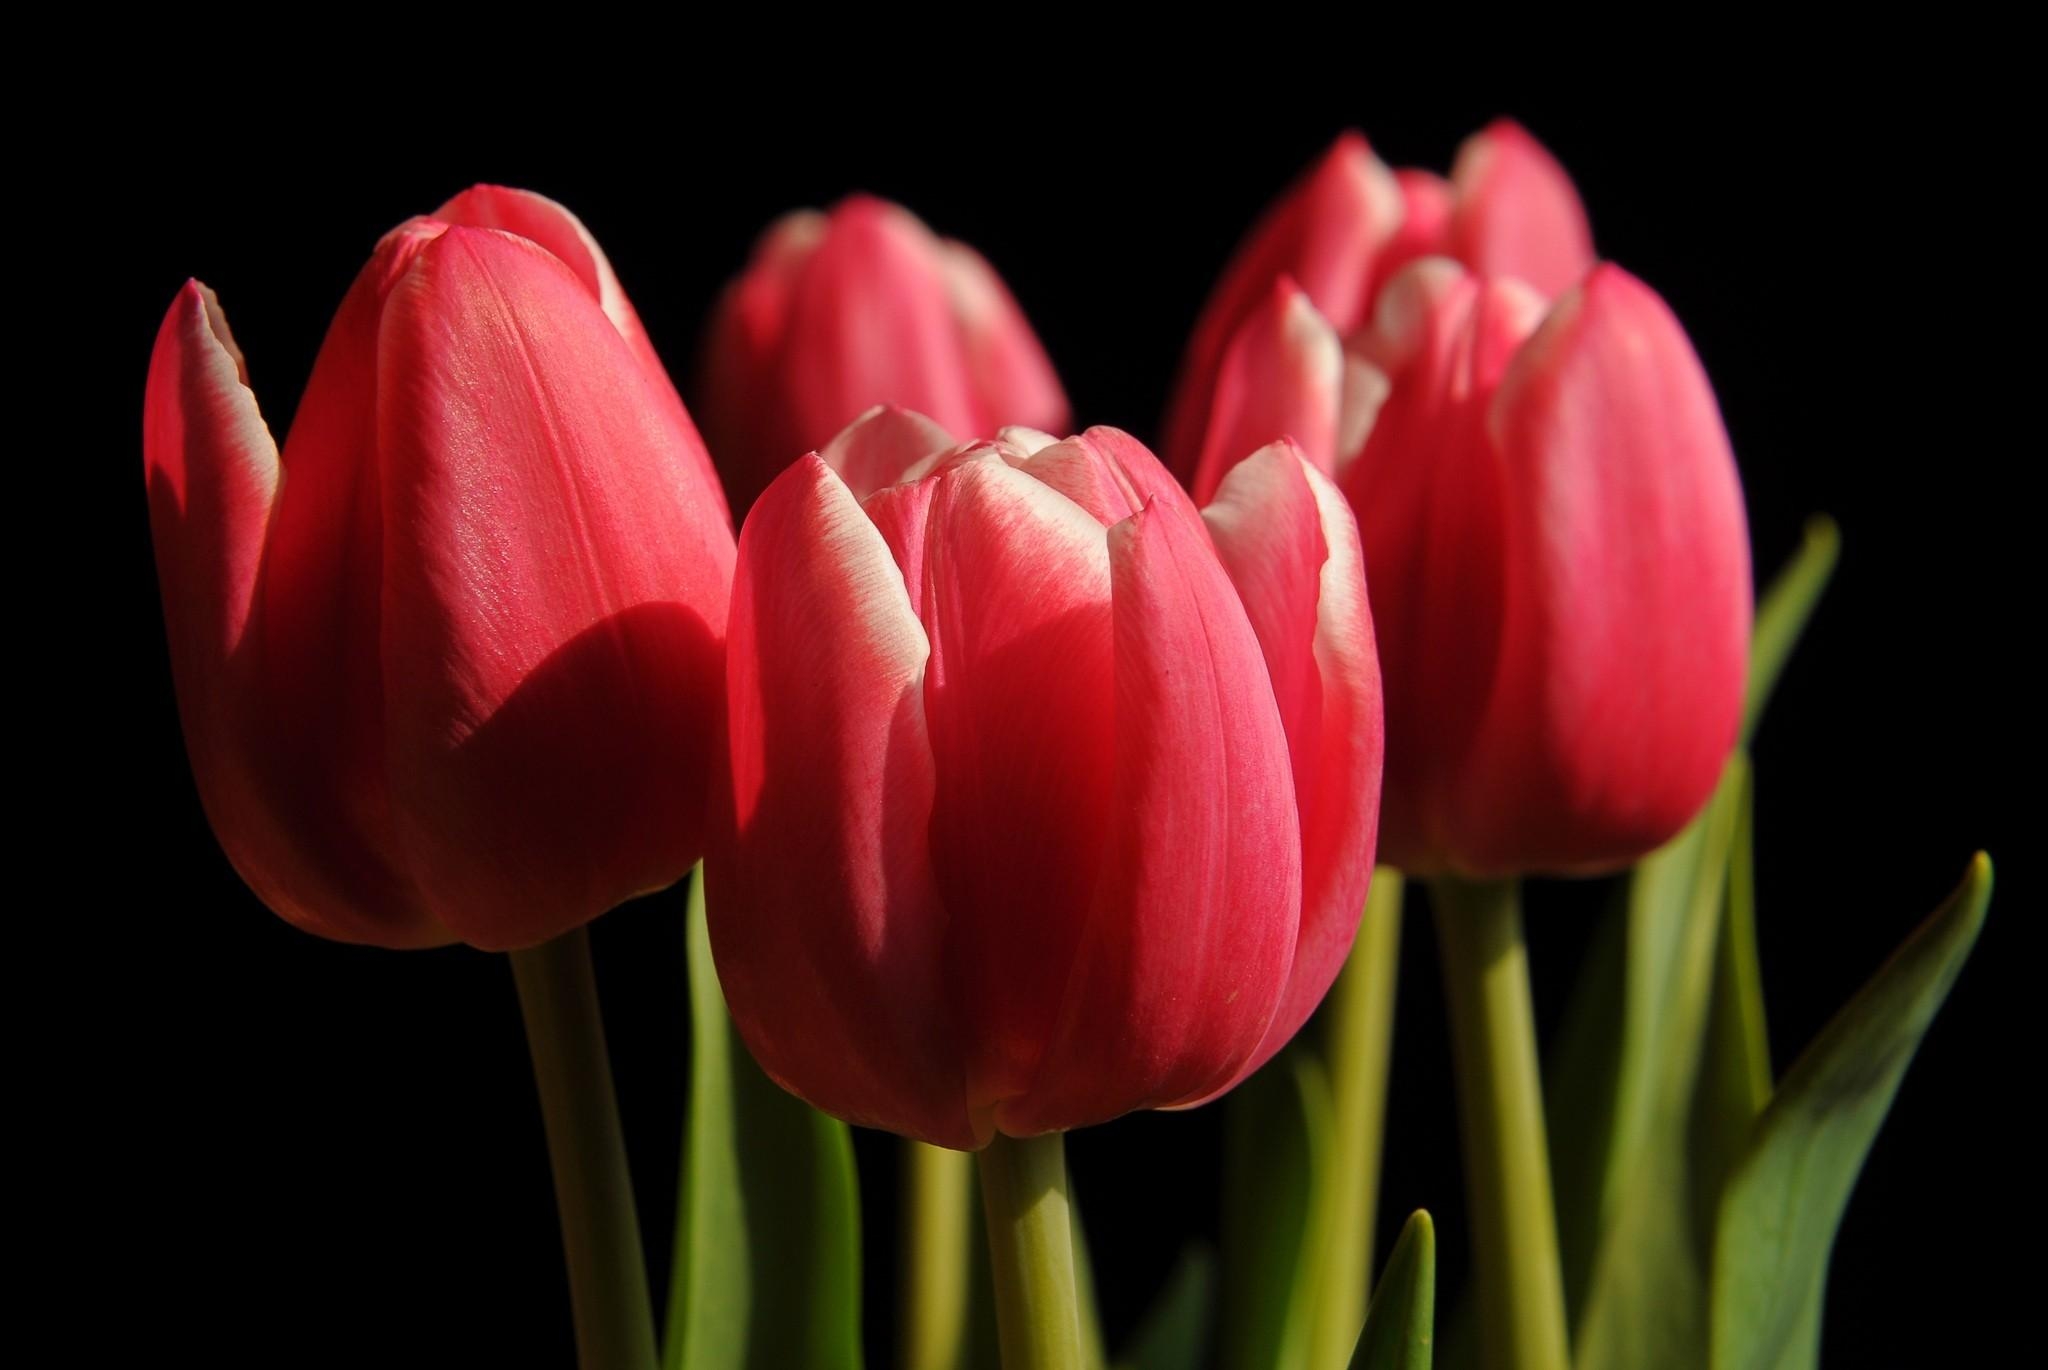 tulips, black background, flowers, close up, buds, spring